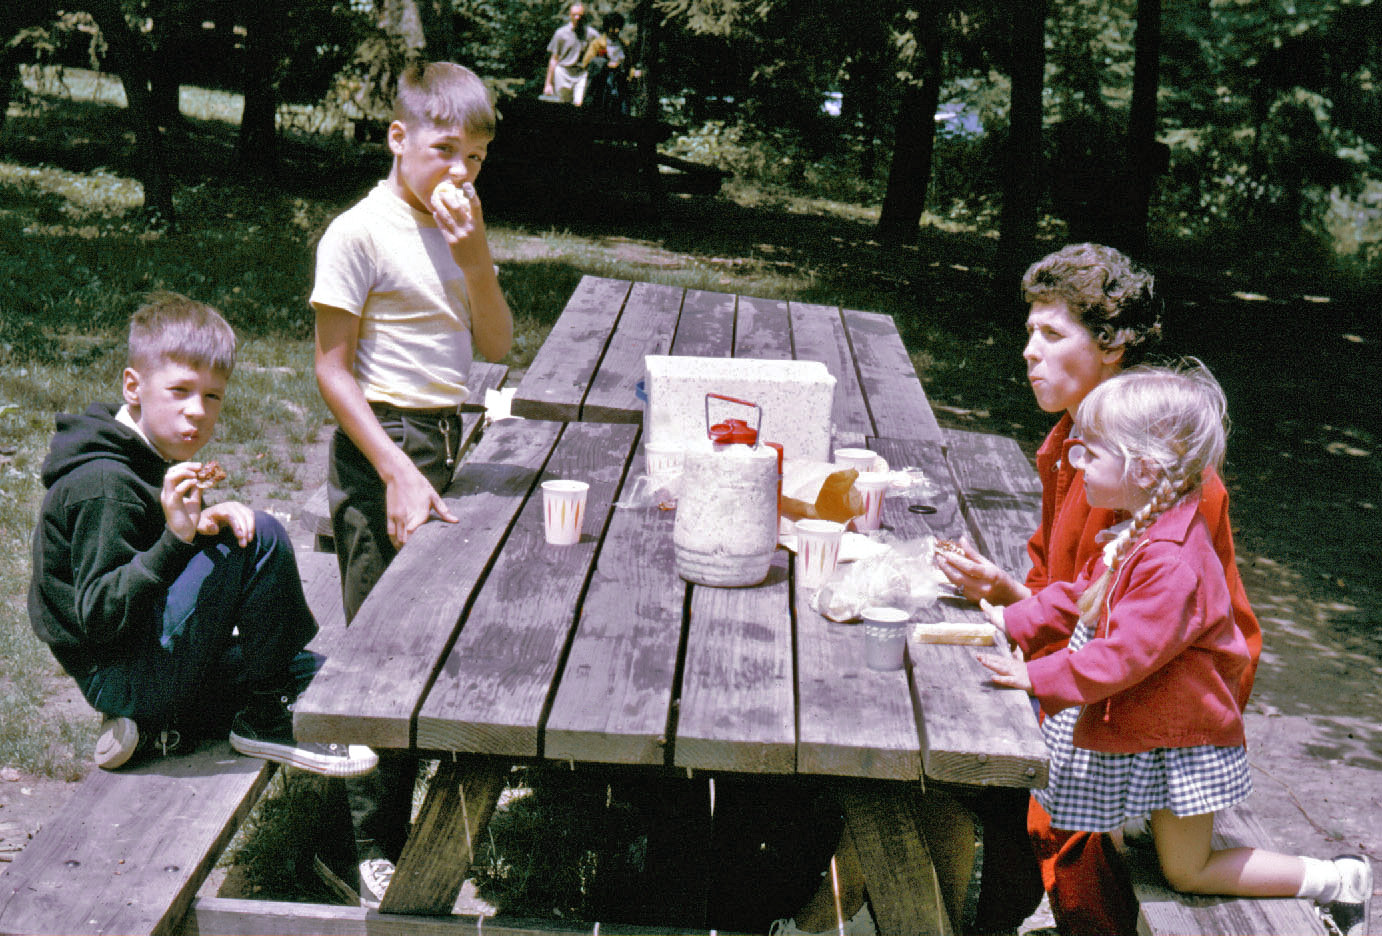 My folks were both teachers, so every summer we traveled a lot since they had 3 months off work.  I think this was heading to Michigan sand dunes, around 1967 or so. View full size.